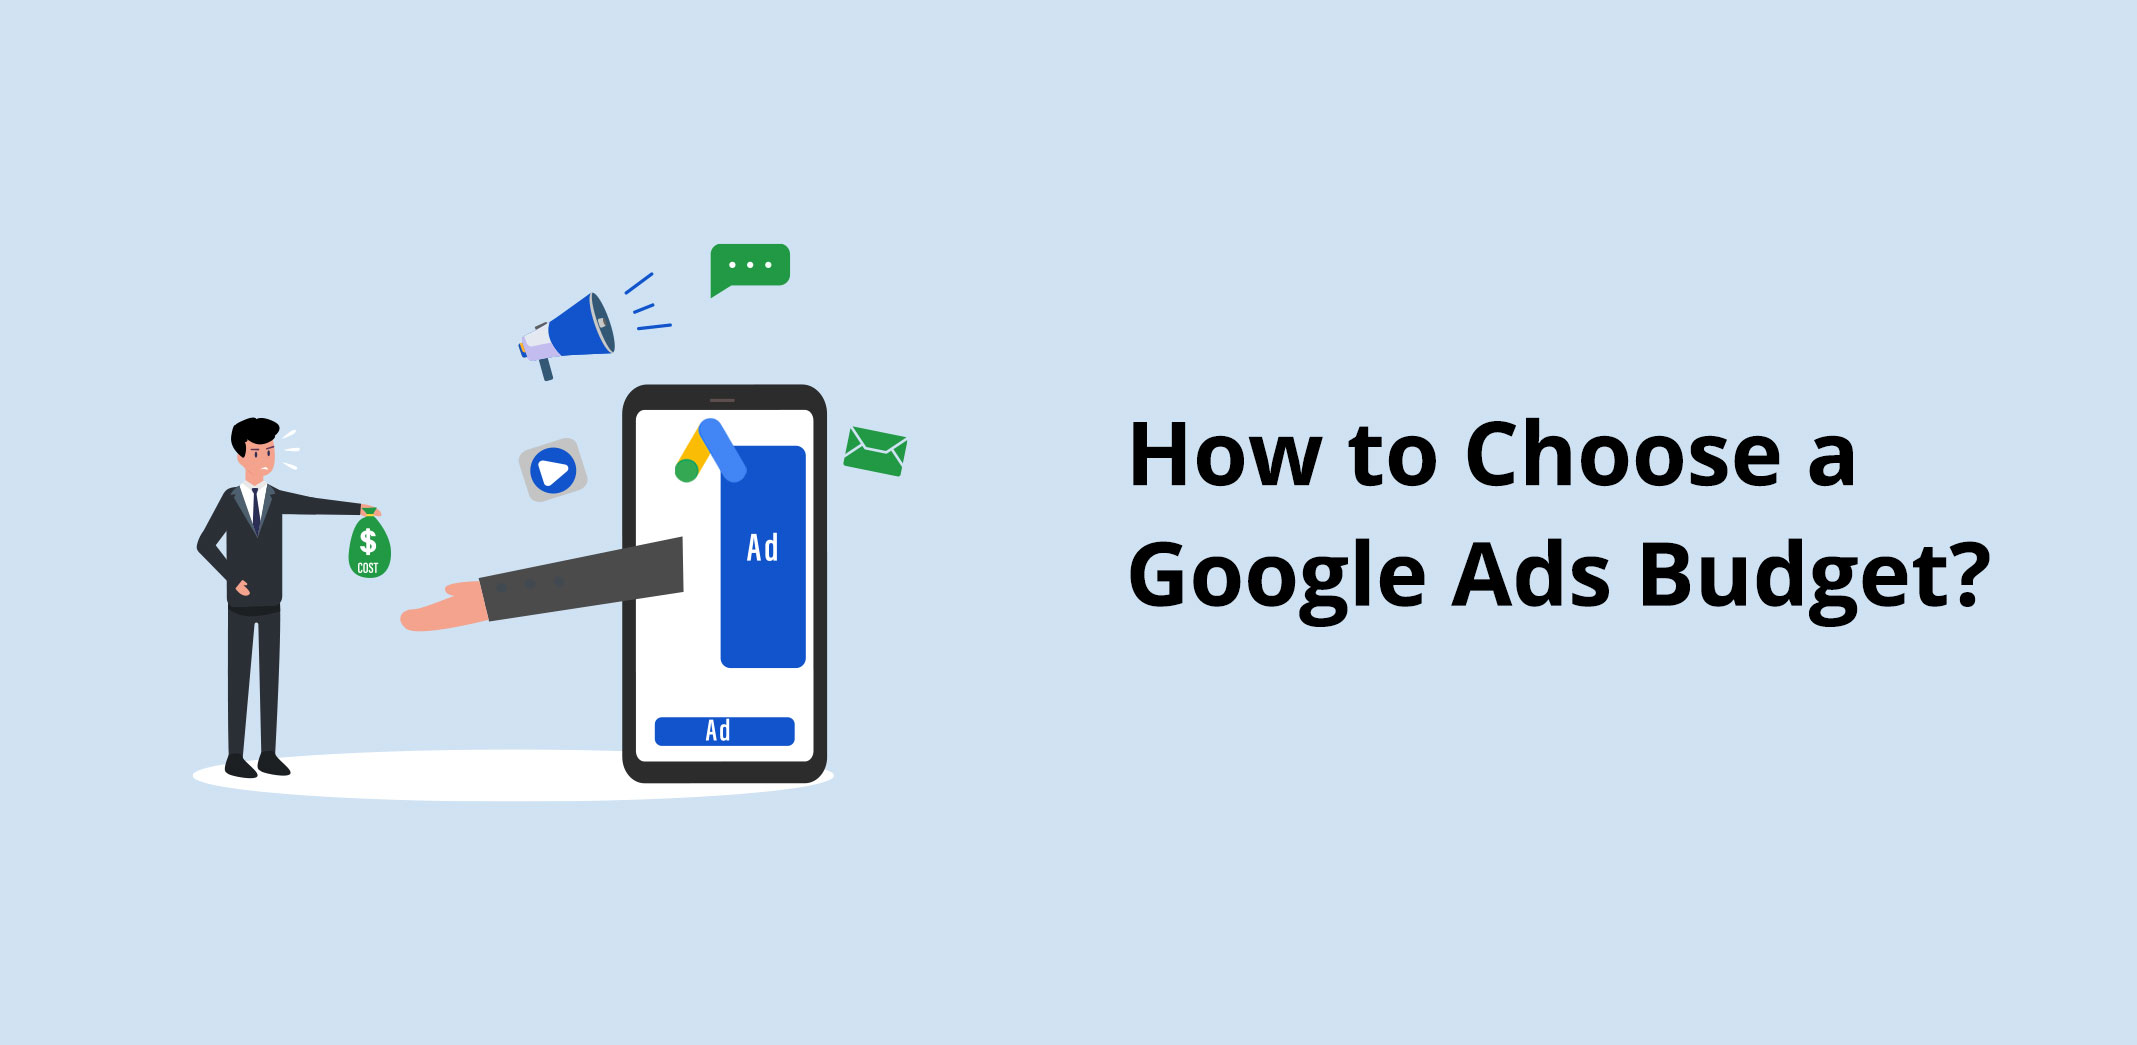 How to Choose a Google Ad Budget